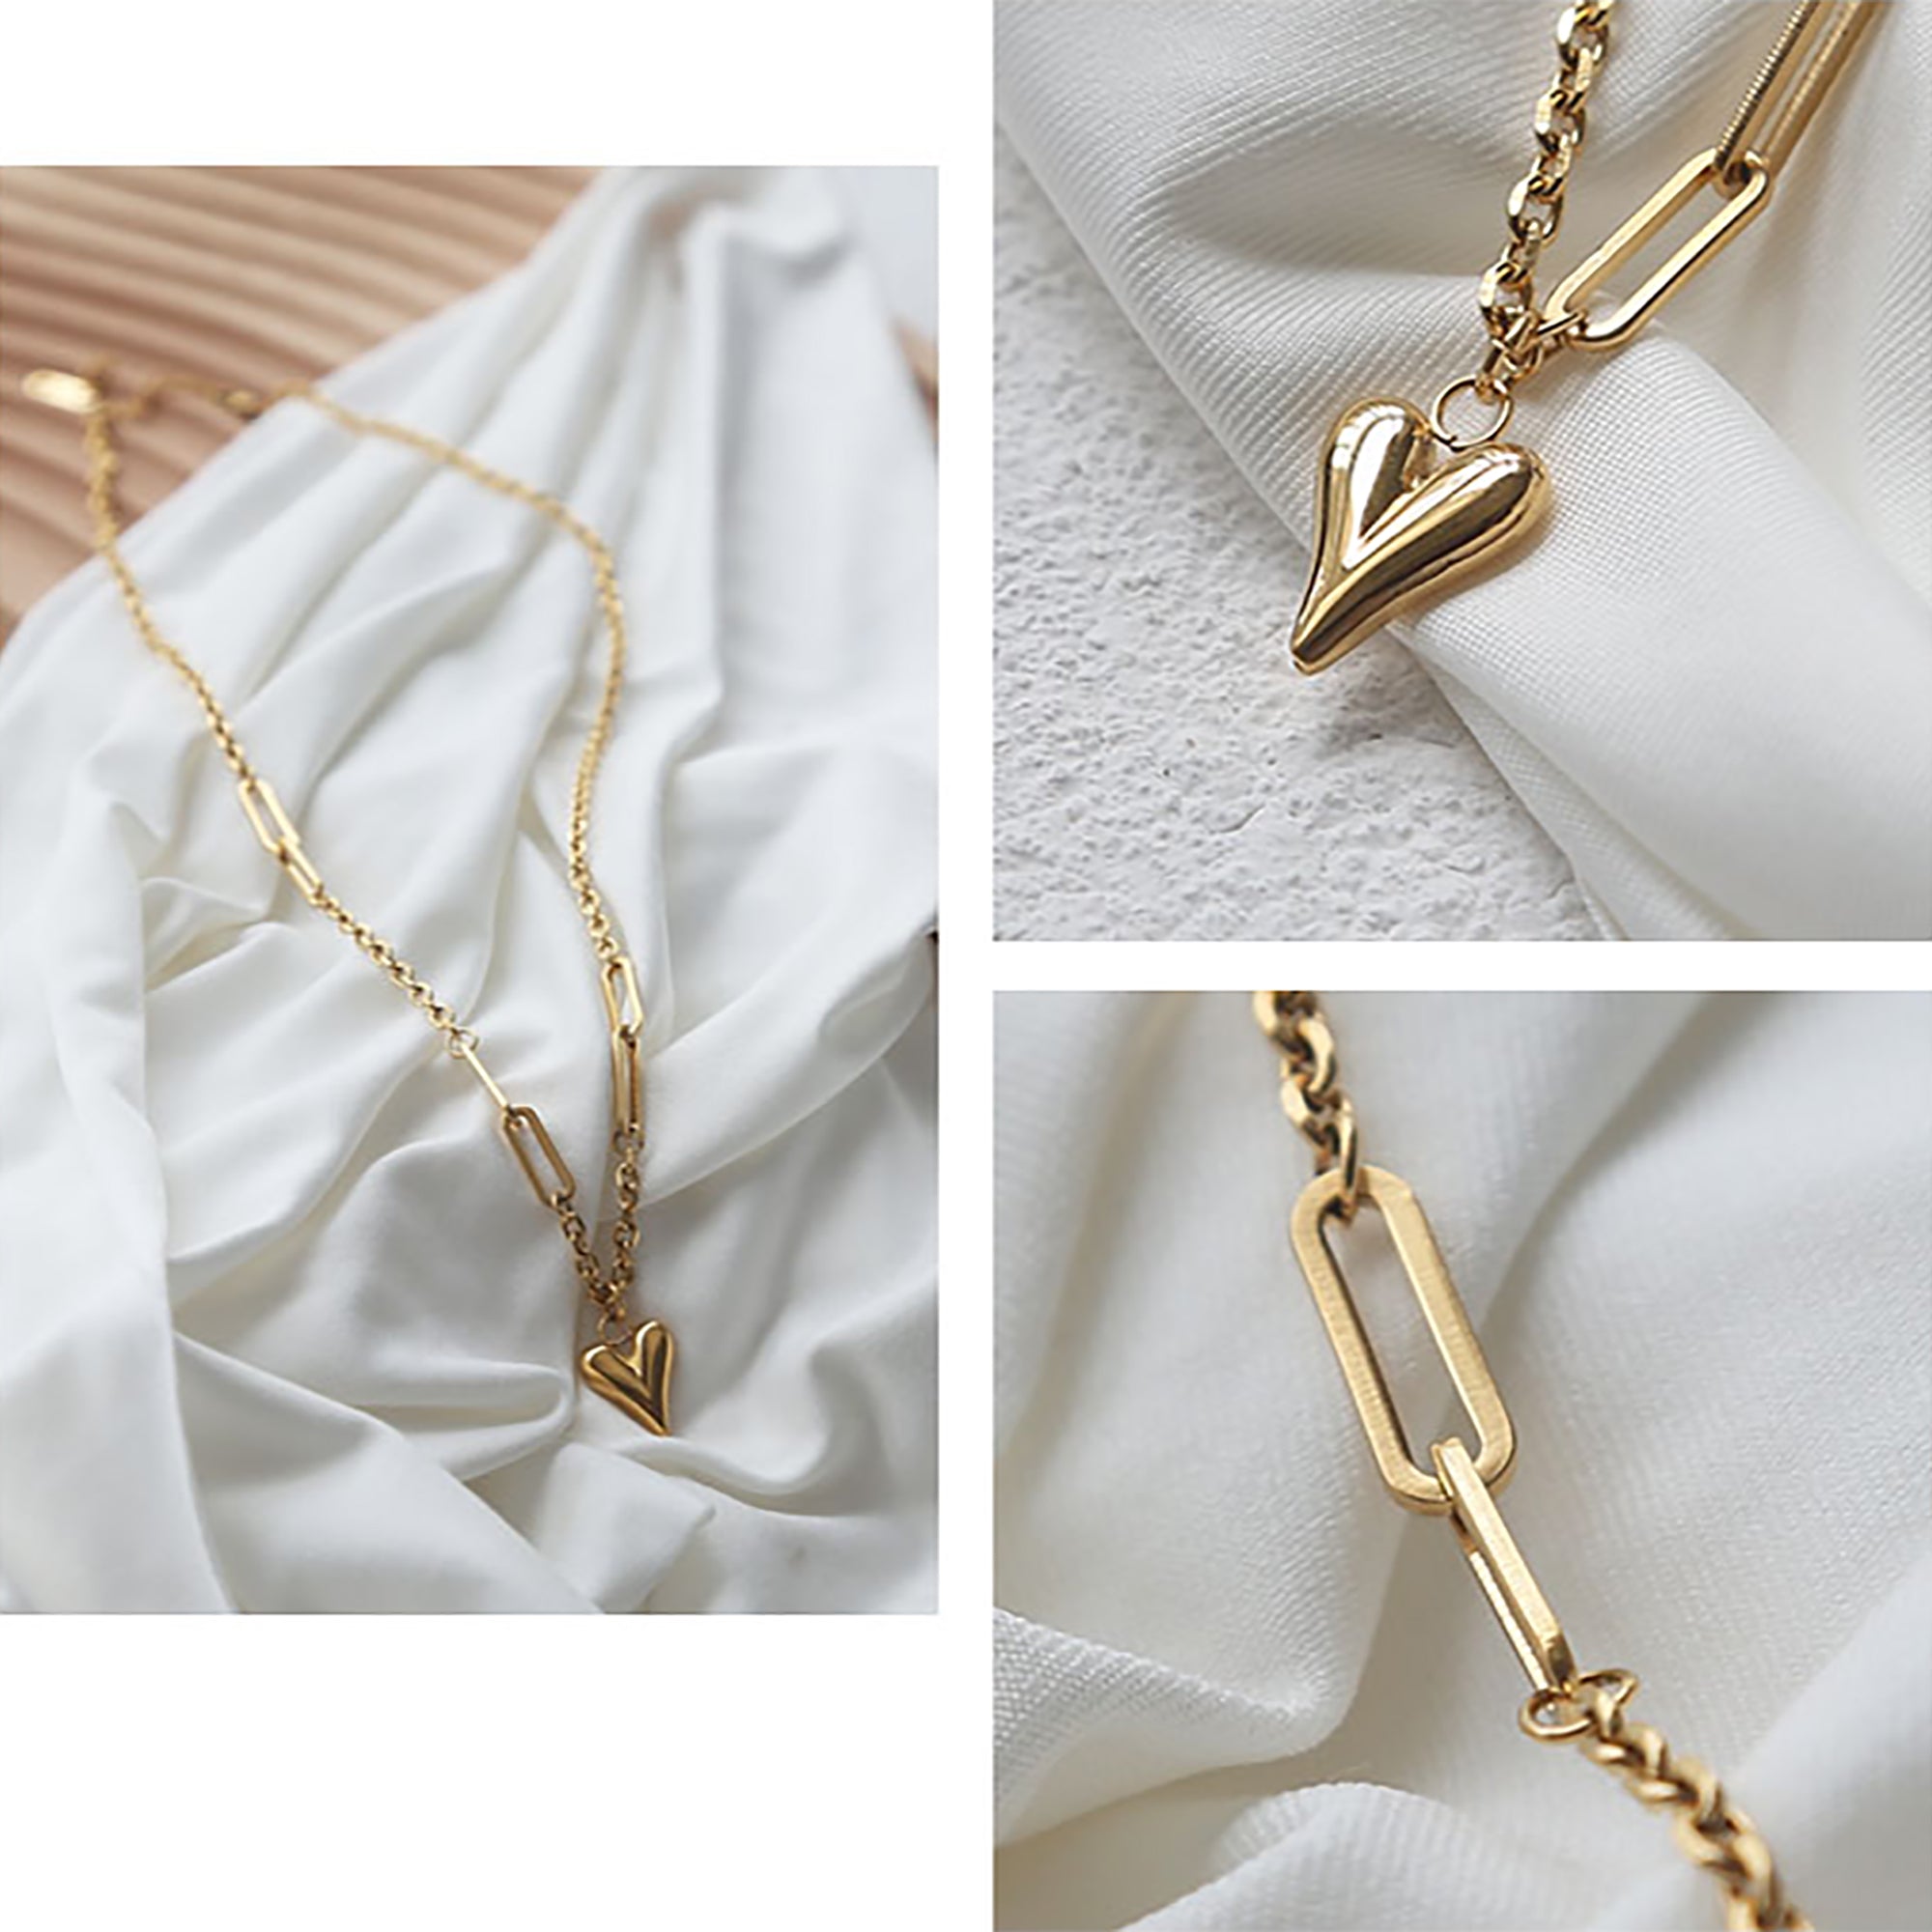 18K Gold Plated Heart Pendant Necklace Gift wedding influencer styling KOL / Youtuber / Celebrity / Fashion Icon picked